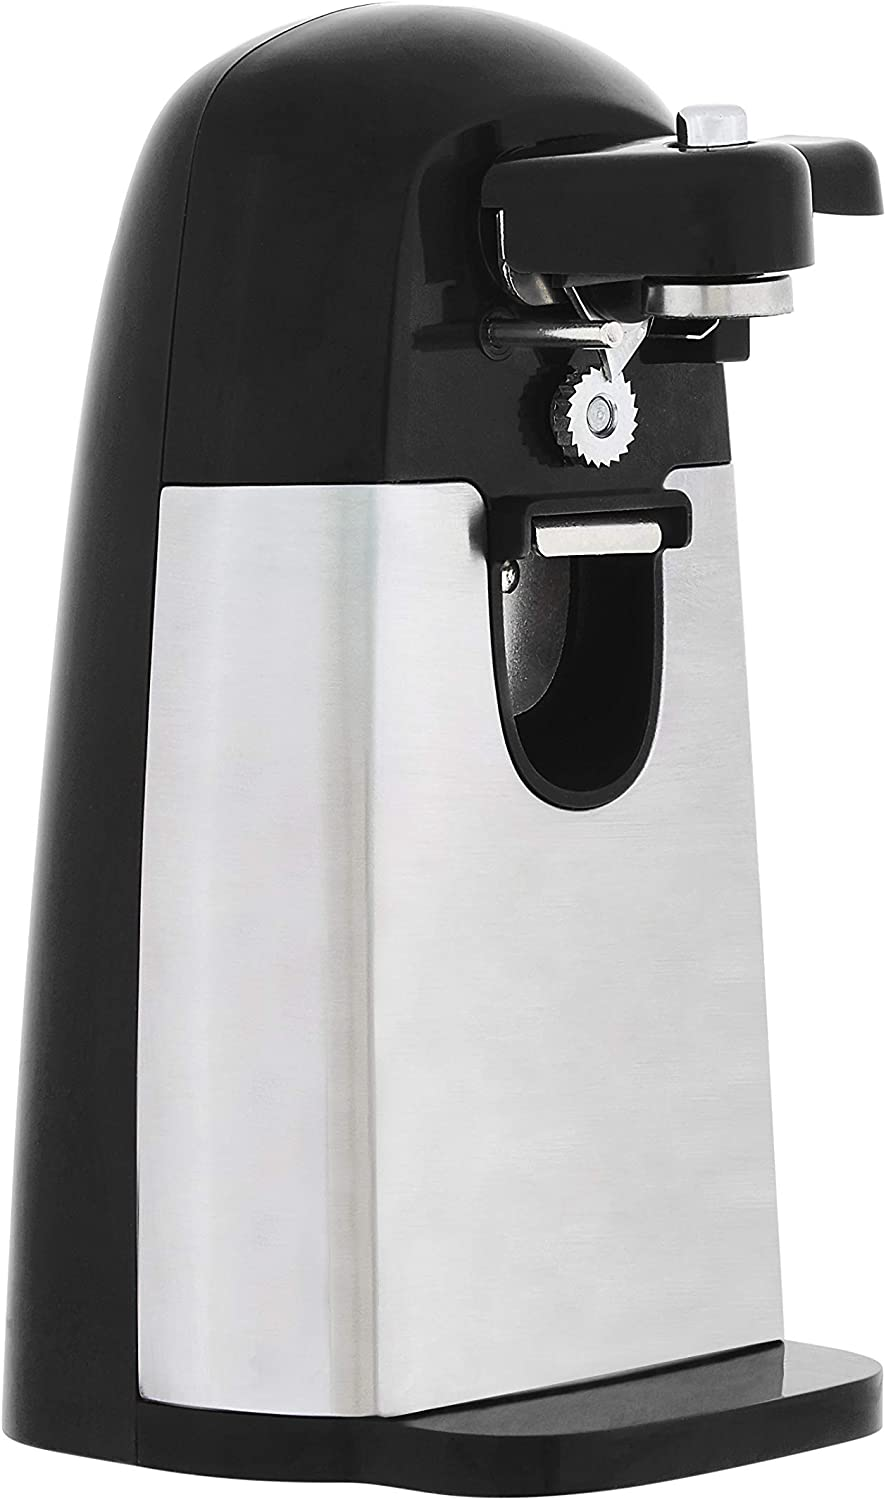 Lavender Cuisinart Deluxe Electric Can Opener , Cuisinart Deluxe Electric  Can Opener, Cuisinart Appliances 